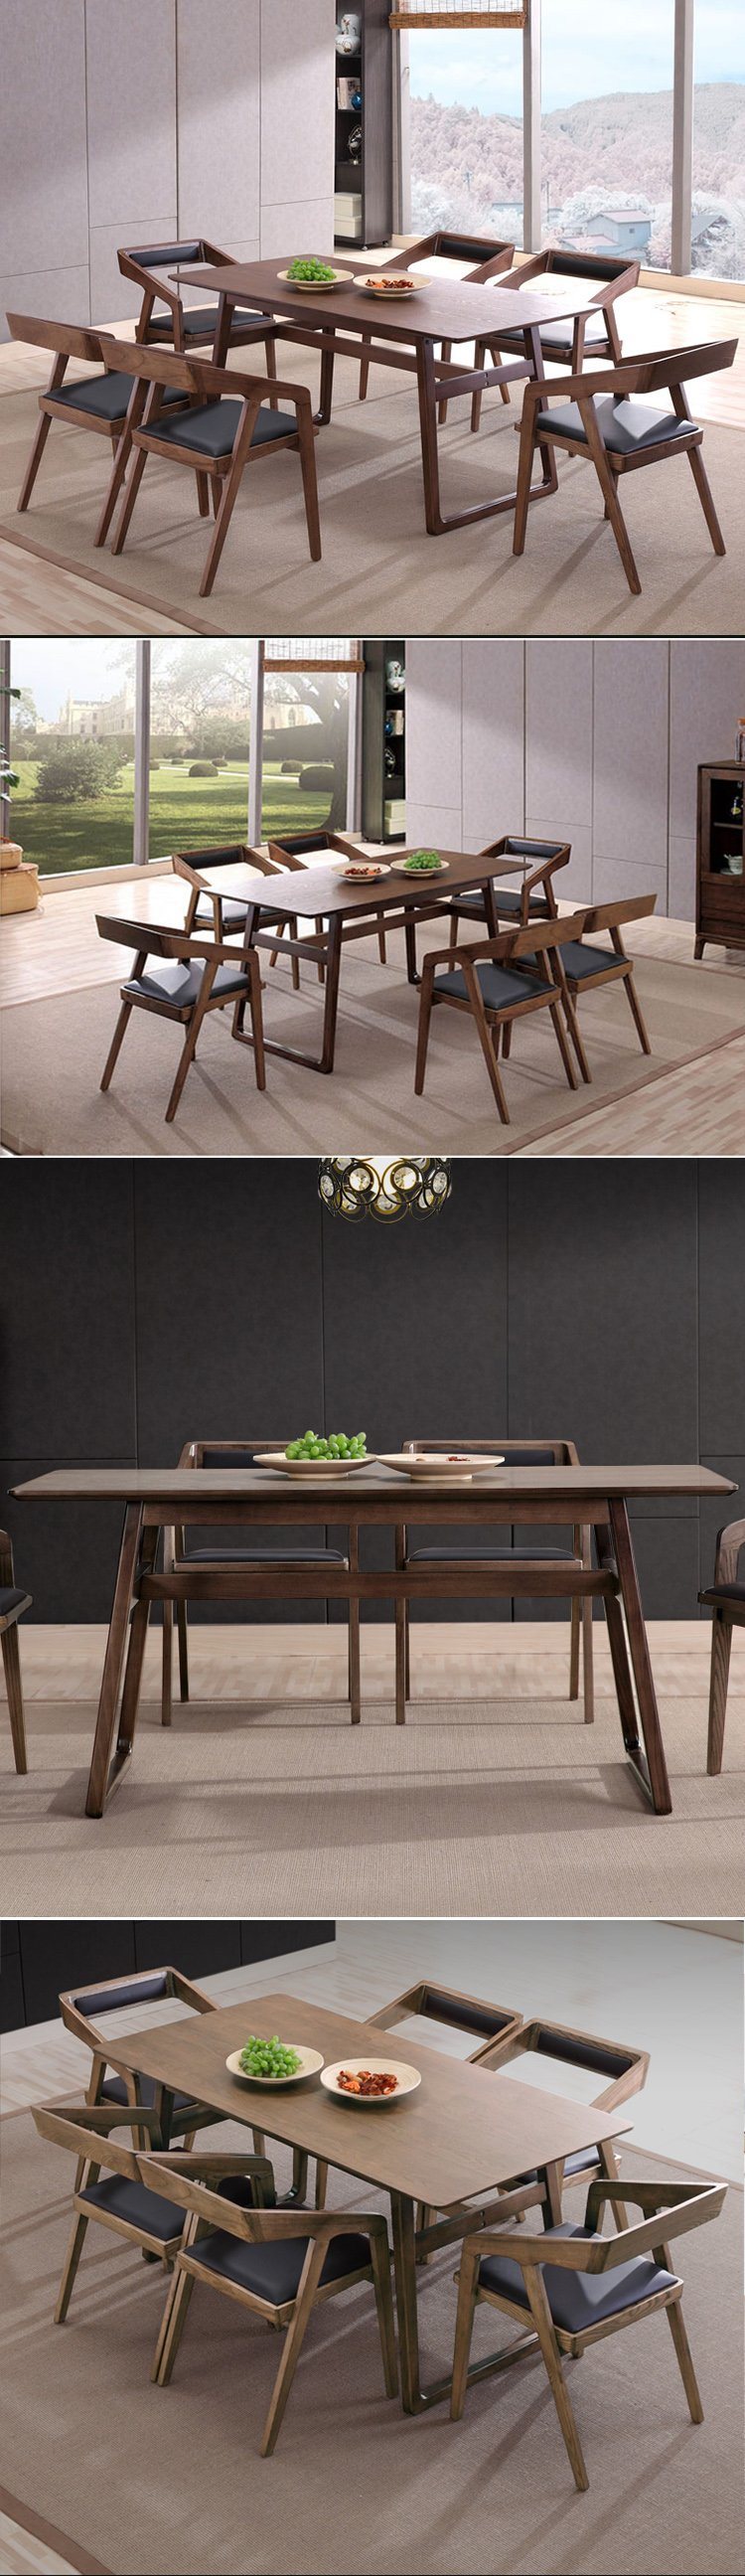 Modern Wood Furniture and Chair Restaurant Table for Home